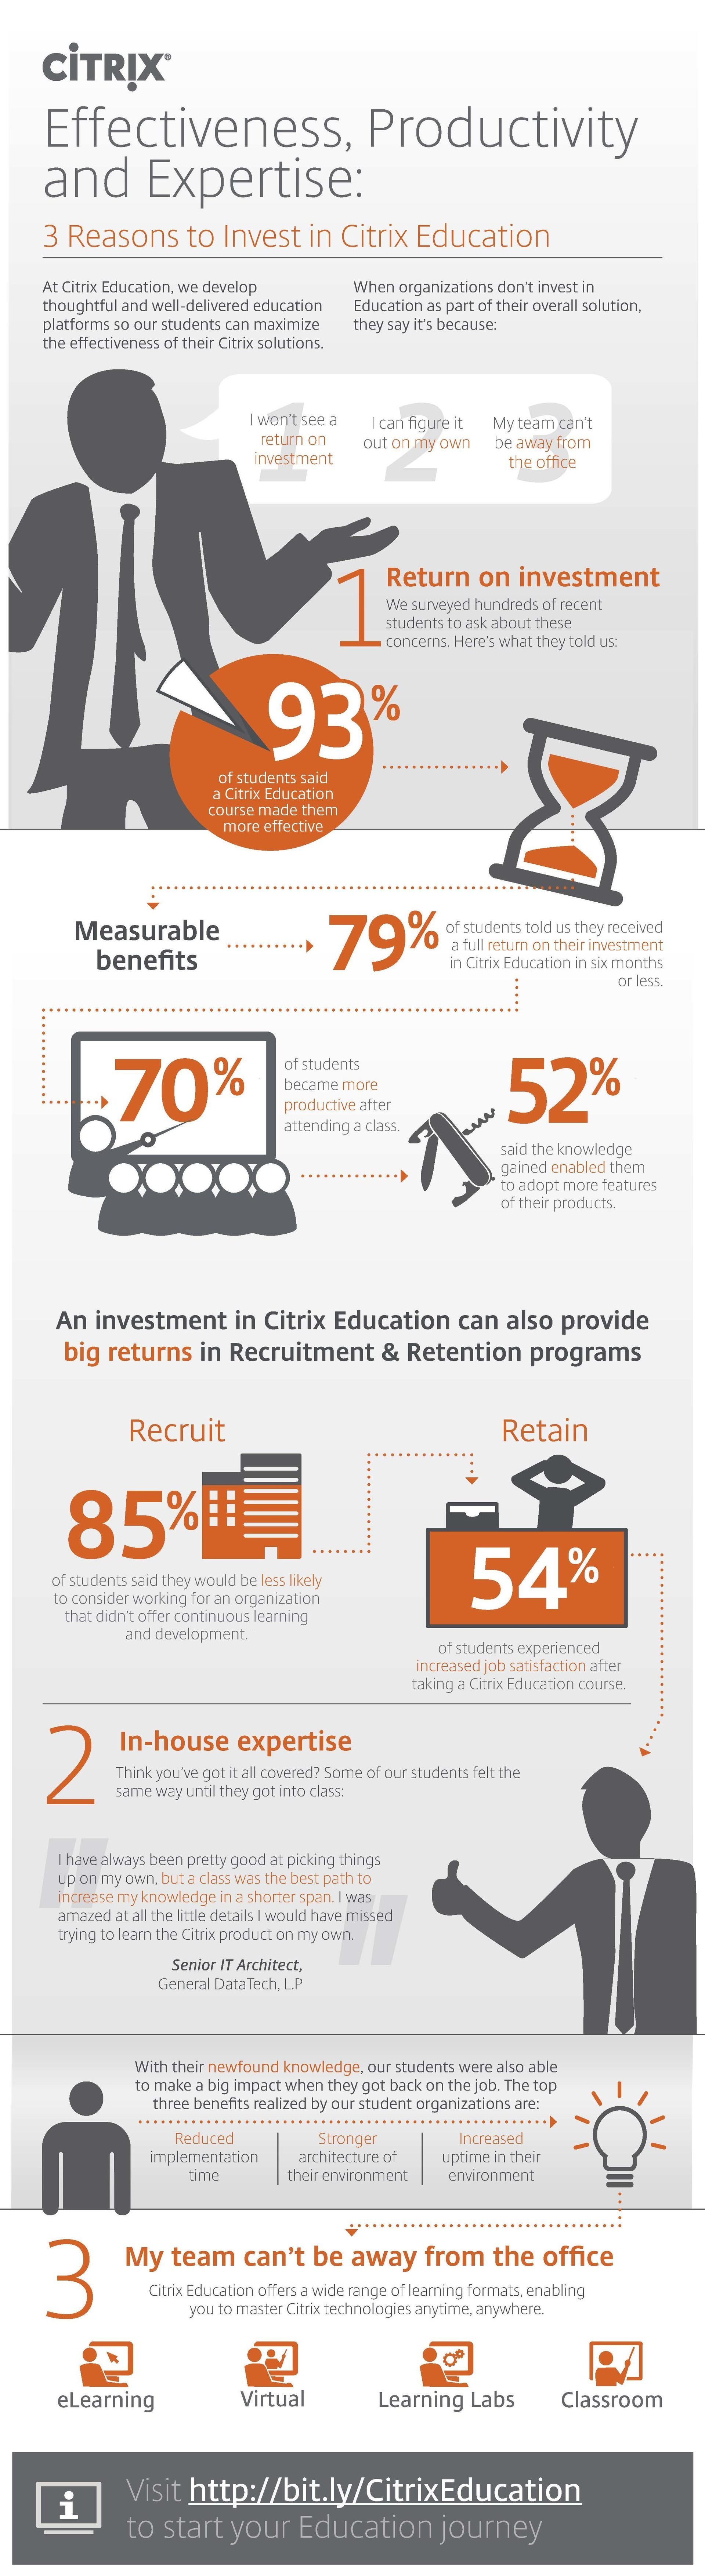 Citrix Education Infographic: Effectiveness, Productivity, and Expertise!